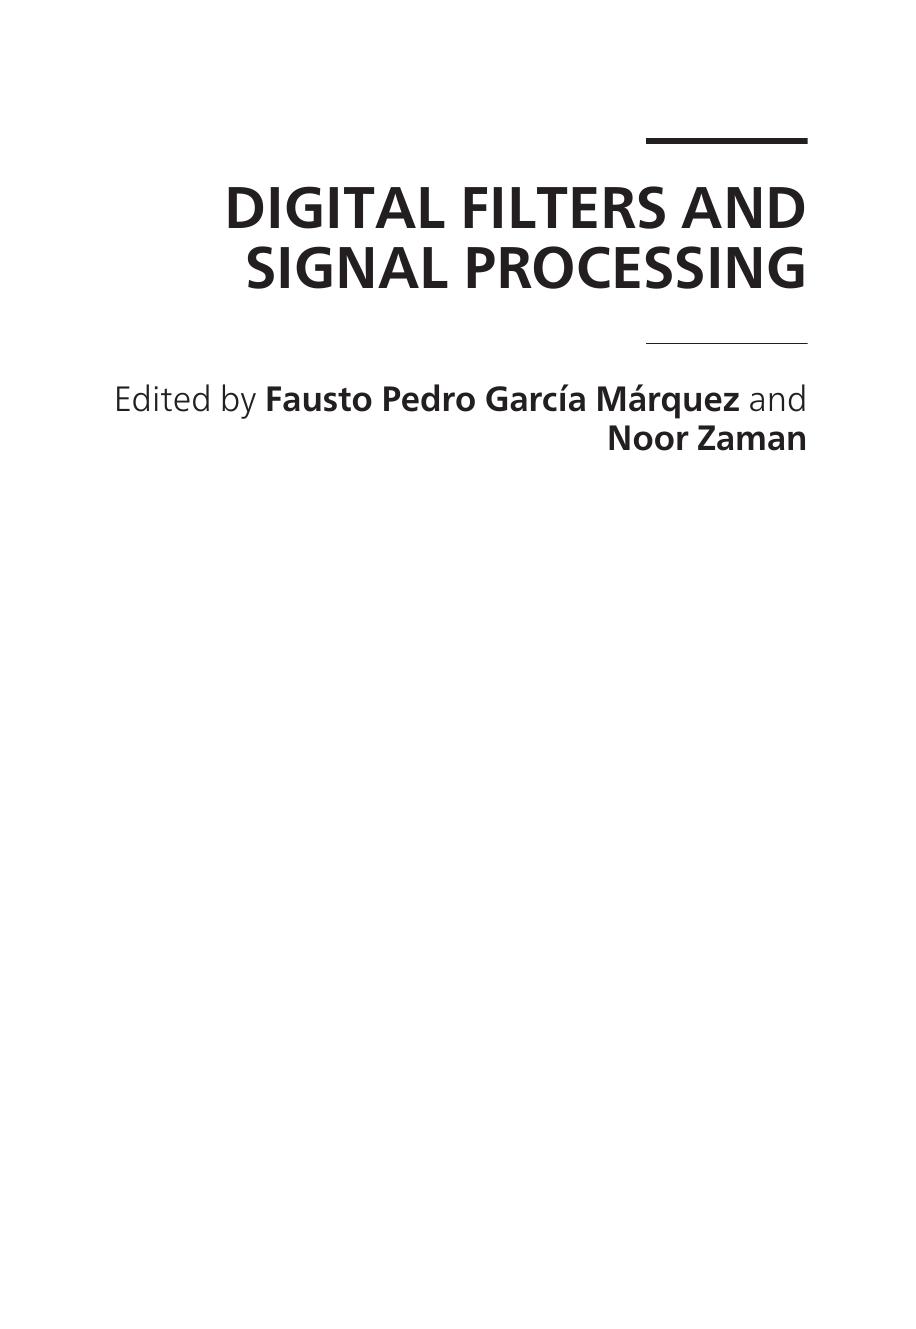 Digital Filters and Signal Processing 2013.pdf